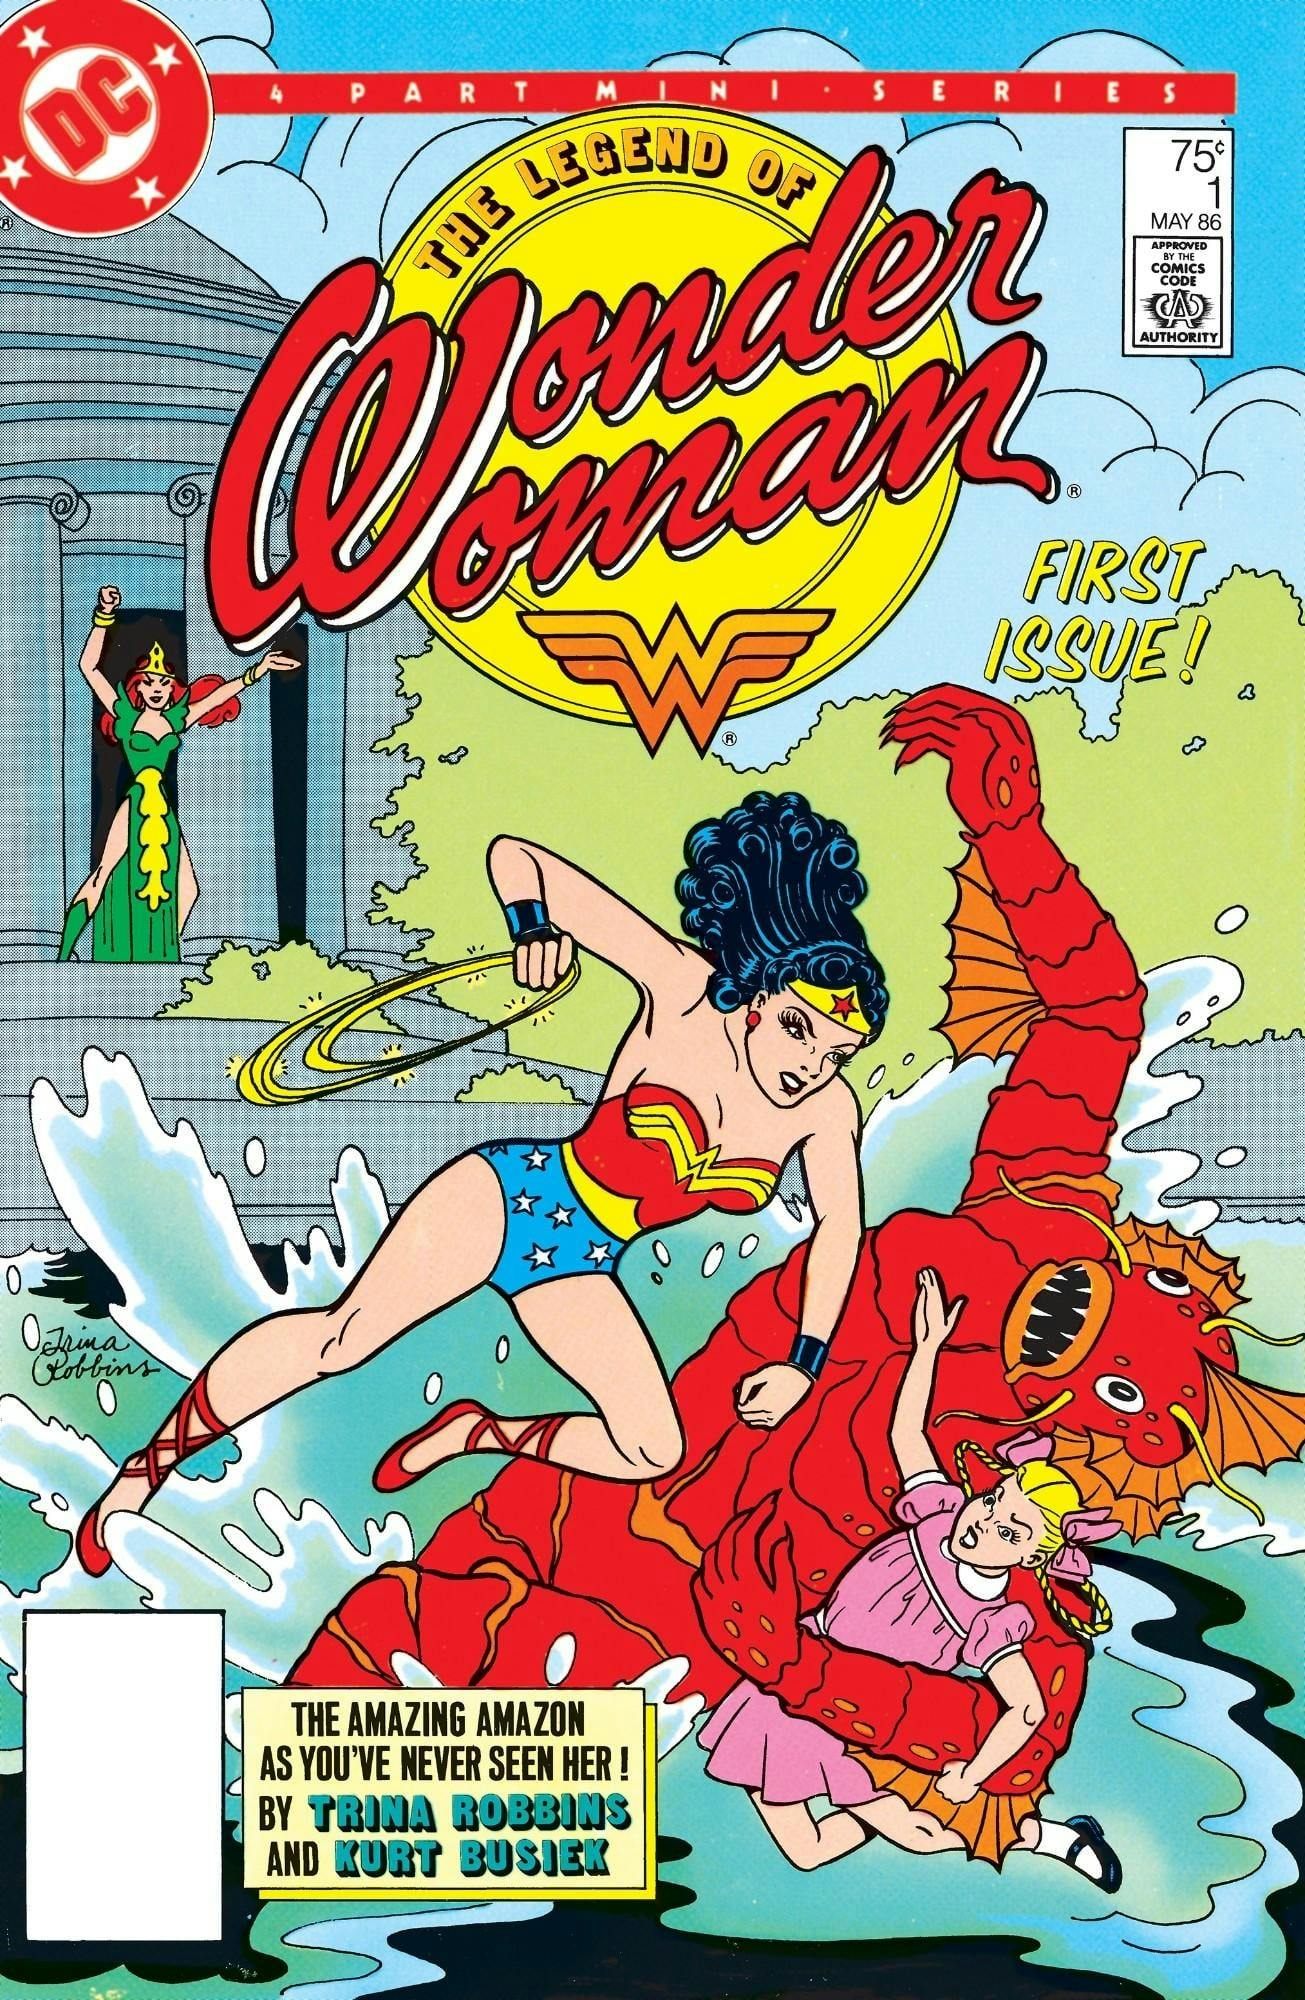 Trina Robbins navigated the boys' club of comics to become the first woman to draw Wonder Woman in her own solo mini-series